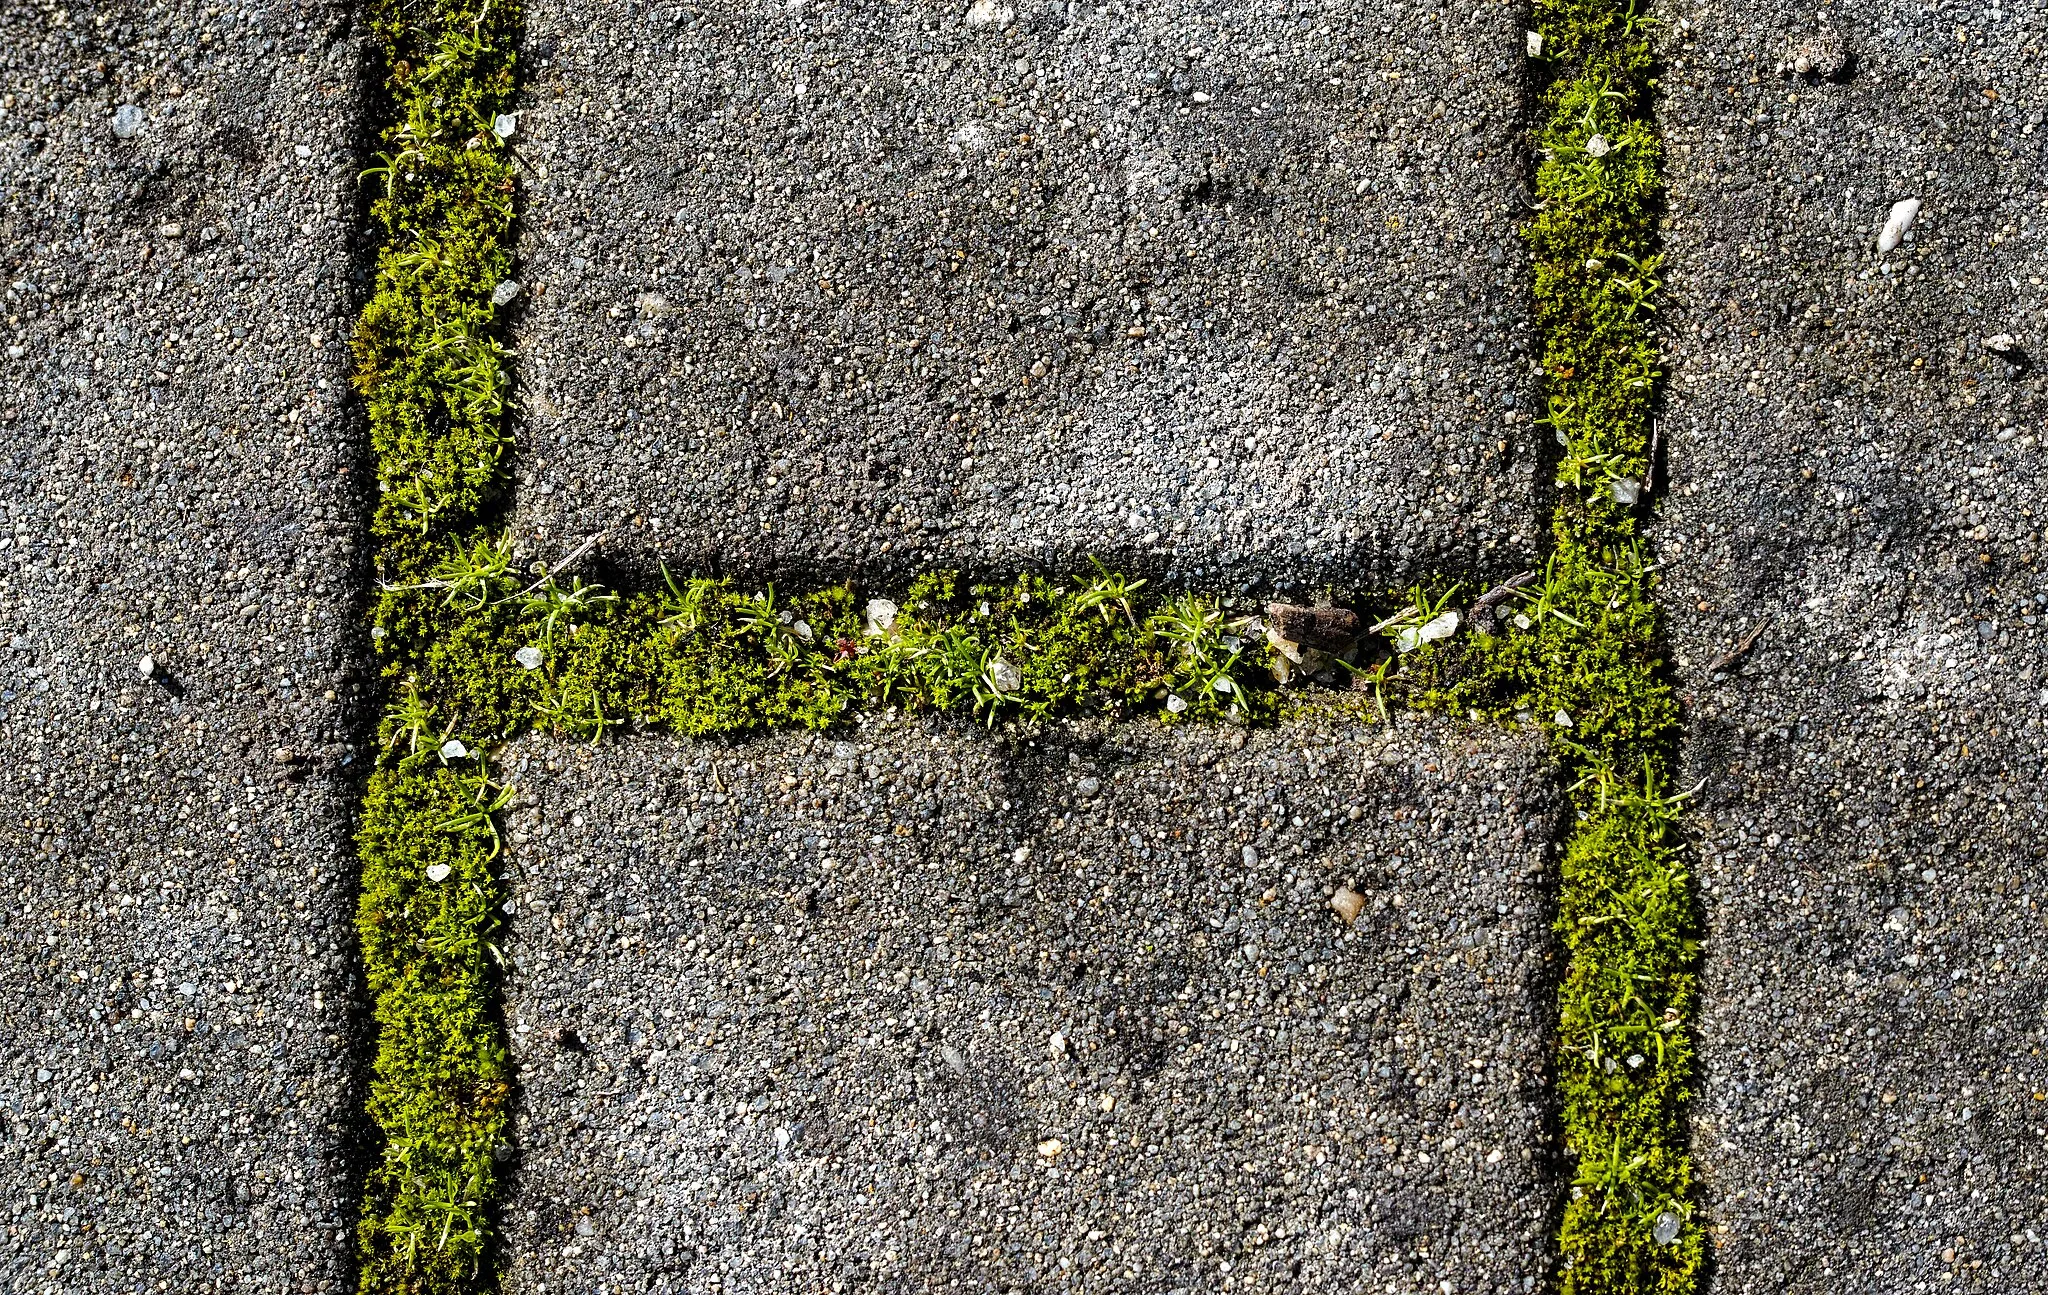 Photo showing: Plants growing in pavement gaps, Ponte de Sor, Portugal (approx. GPS location)